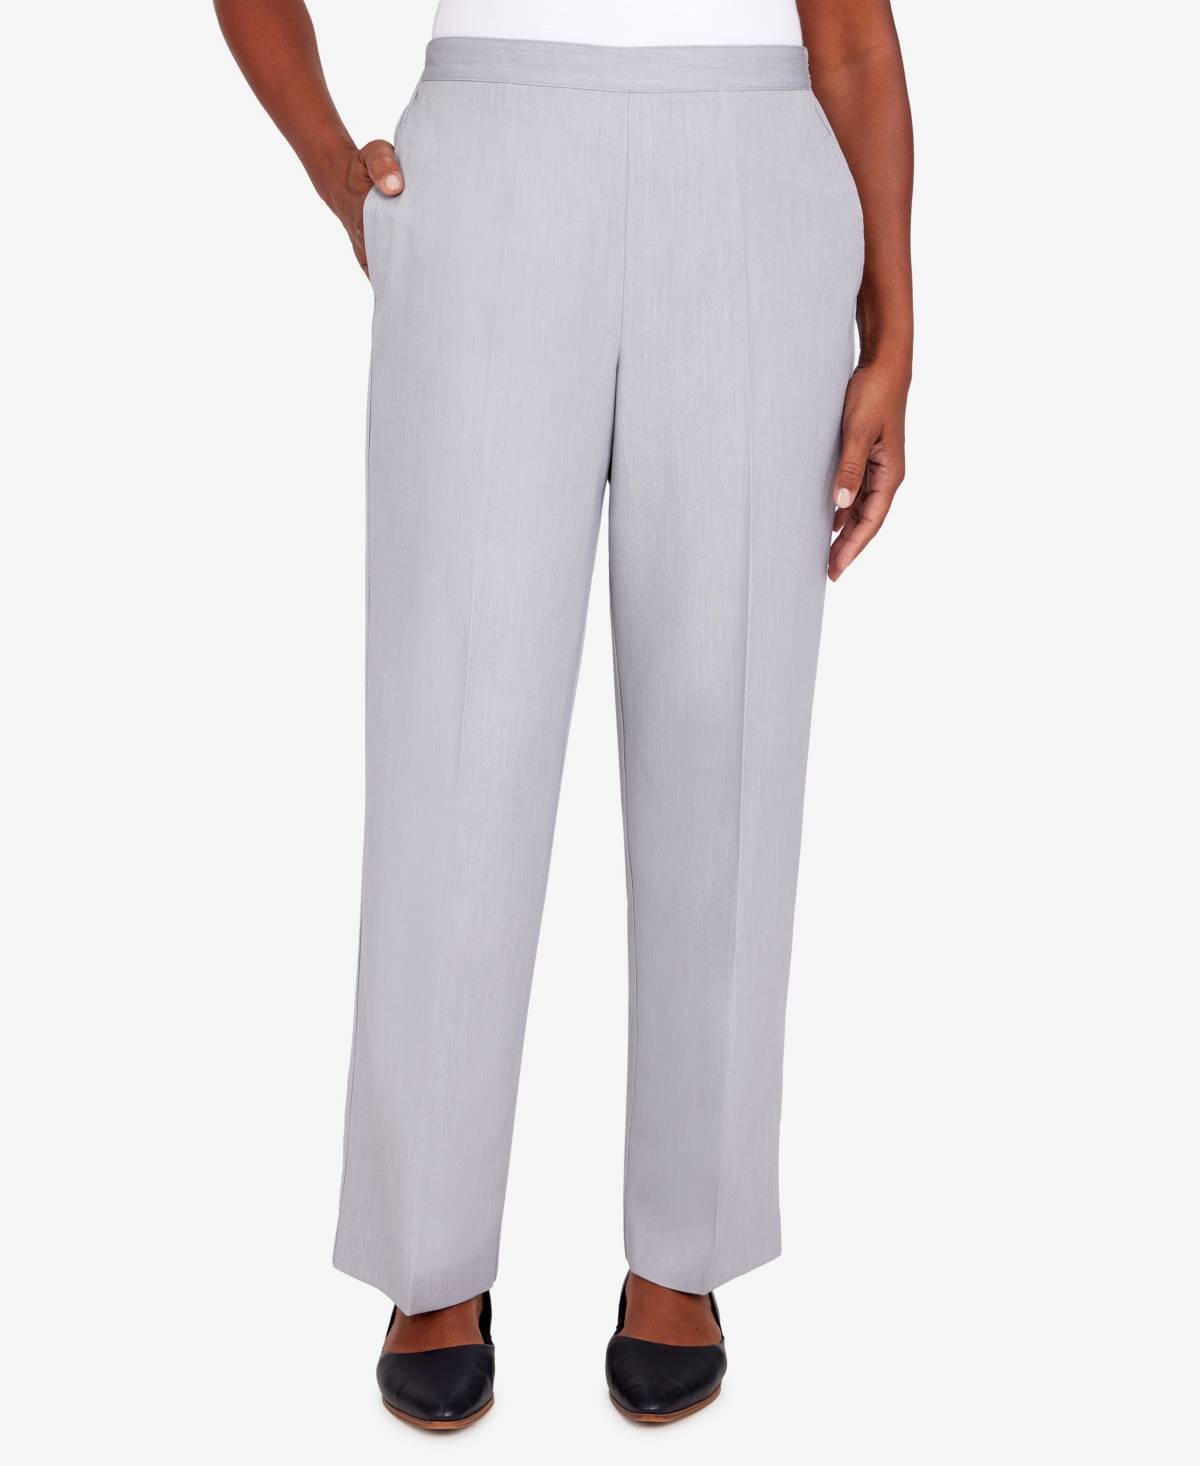  Alfred Dunner Women's Lady Like Chic Short Length Pants